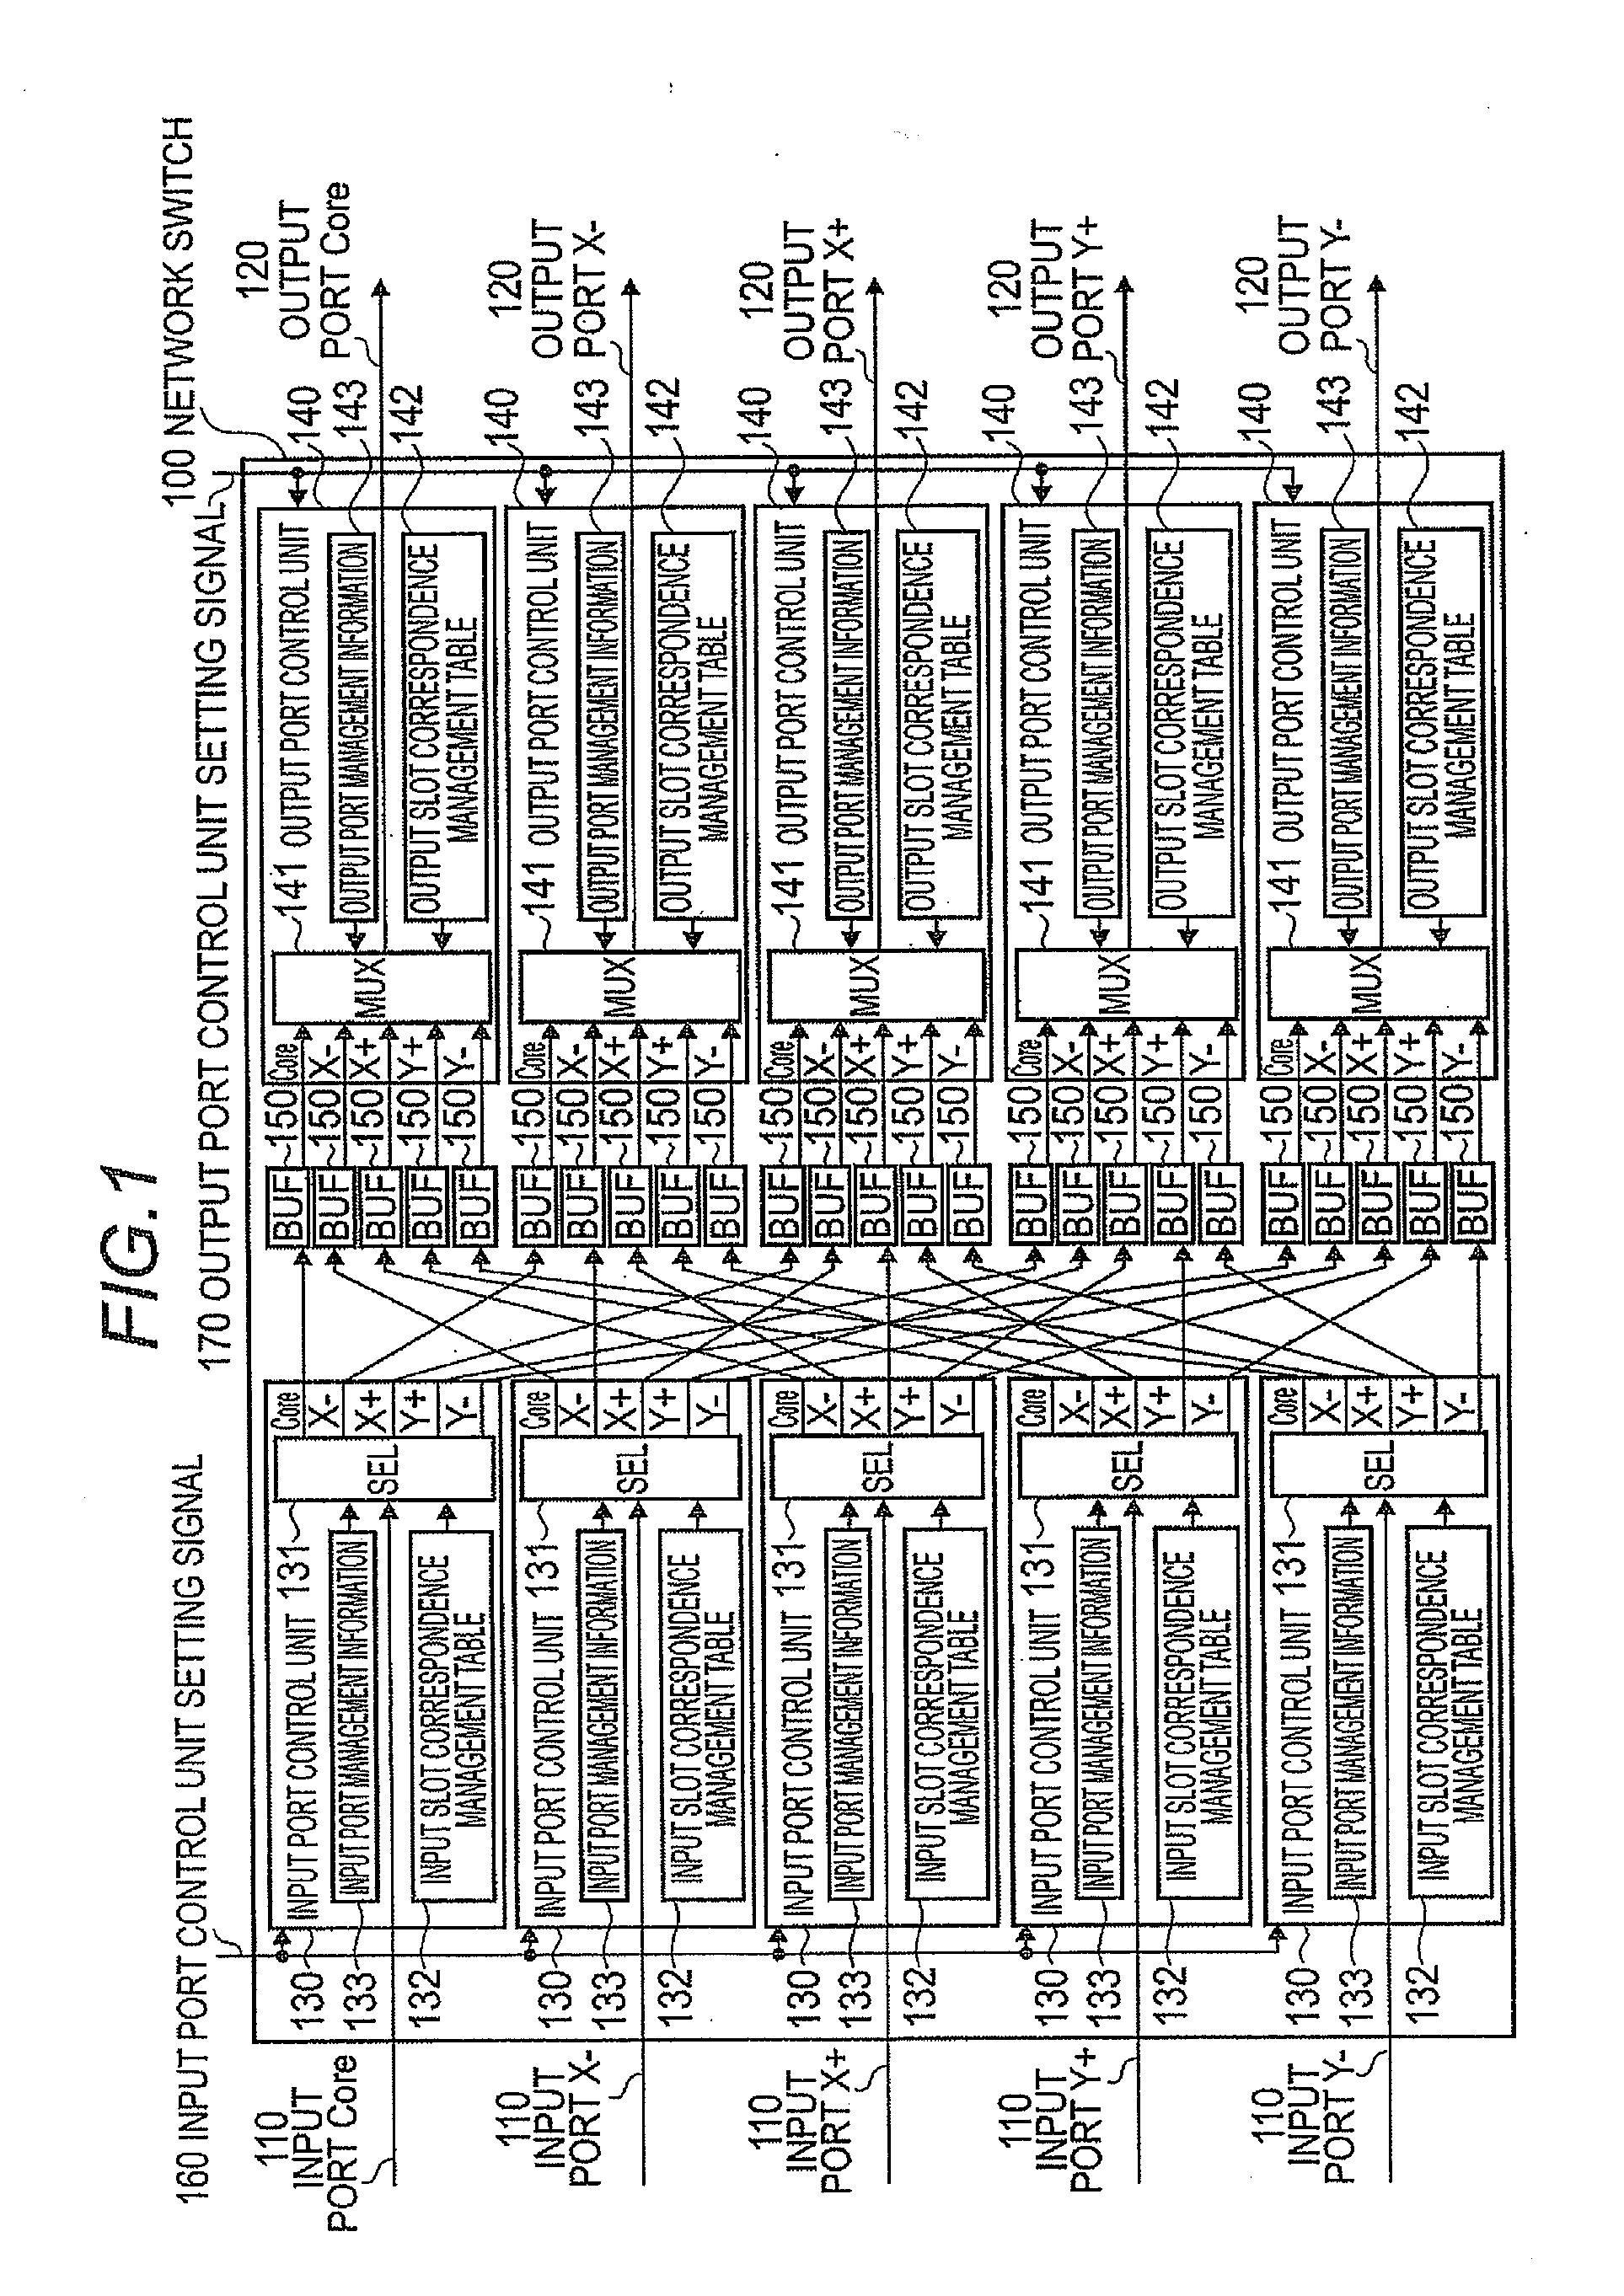 Interprocessor communication system and communication method, network switch, and parallel calculation system